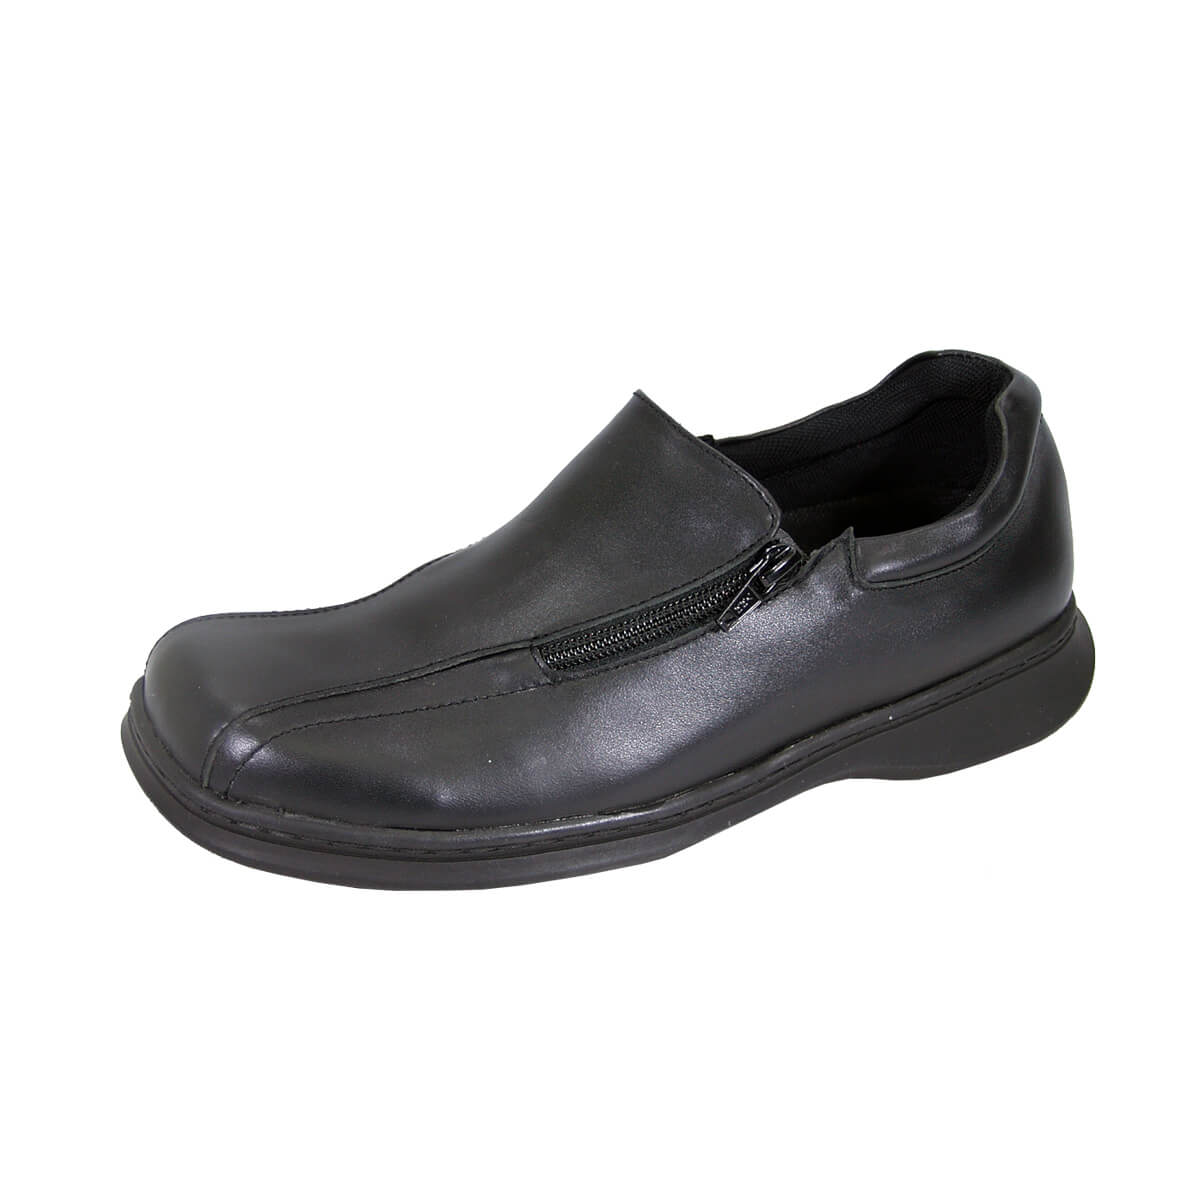 Fazpaz 24 Hour Comfort Liv Women's Wide Width Cushioned Leather Slip On Shoes